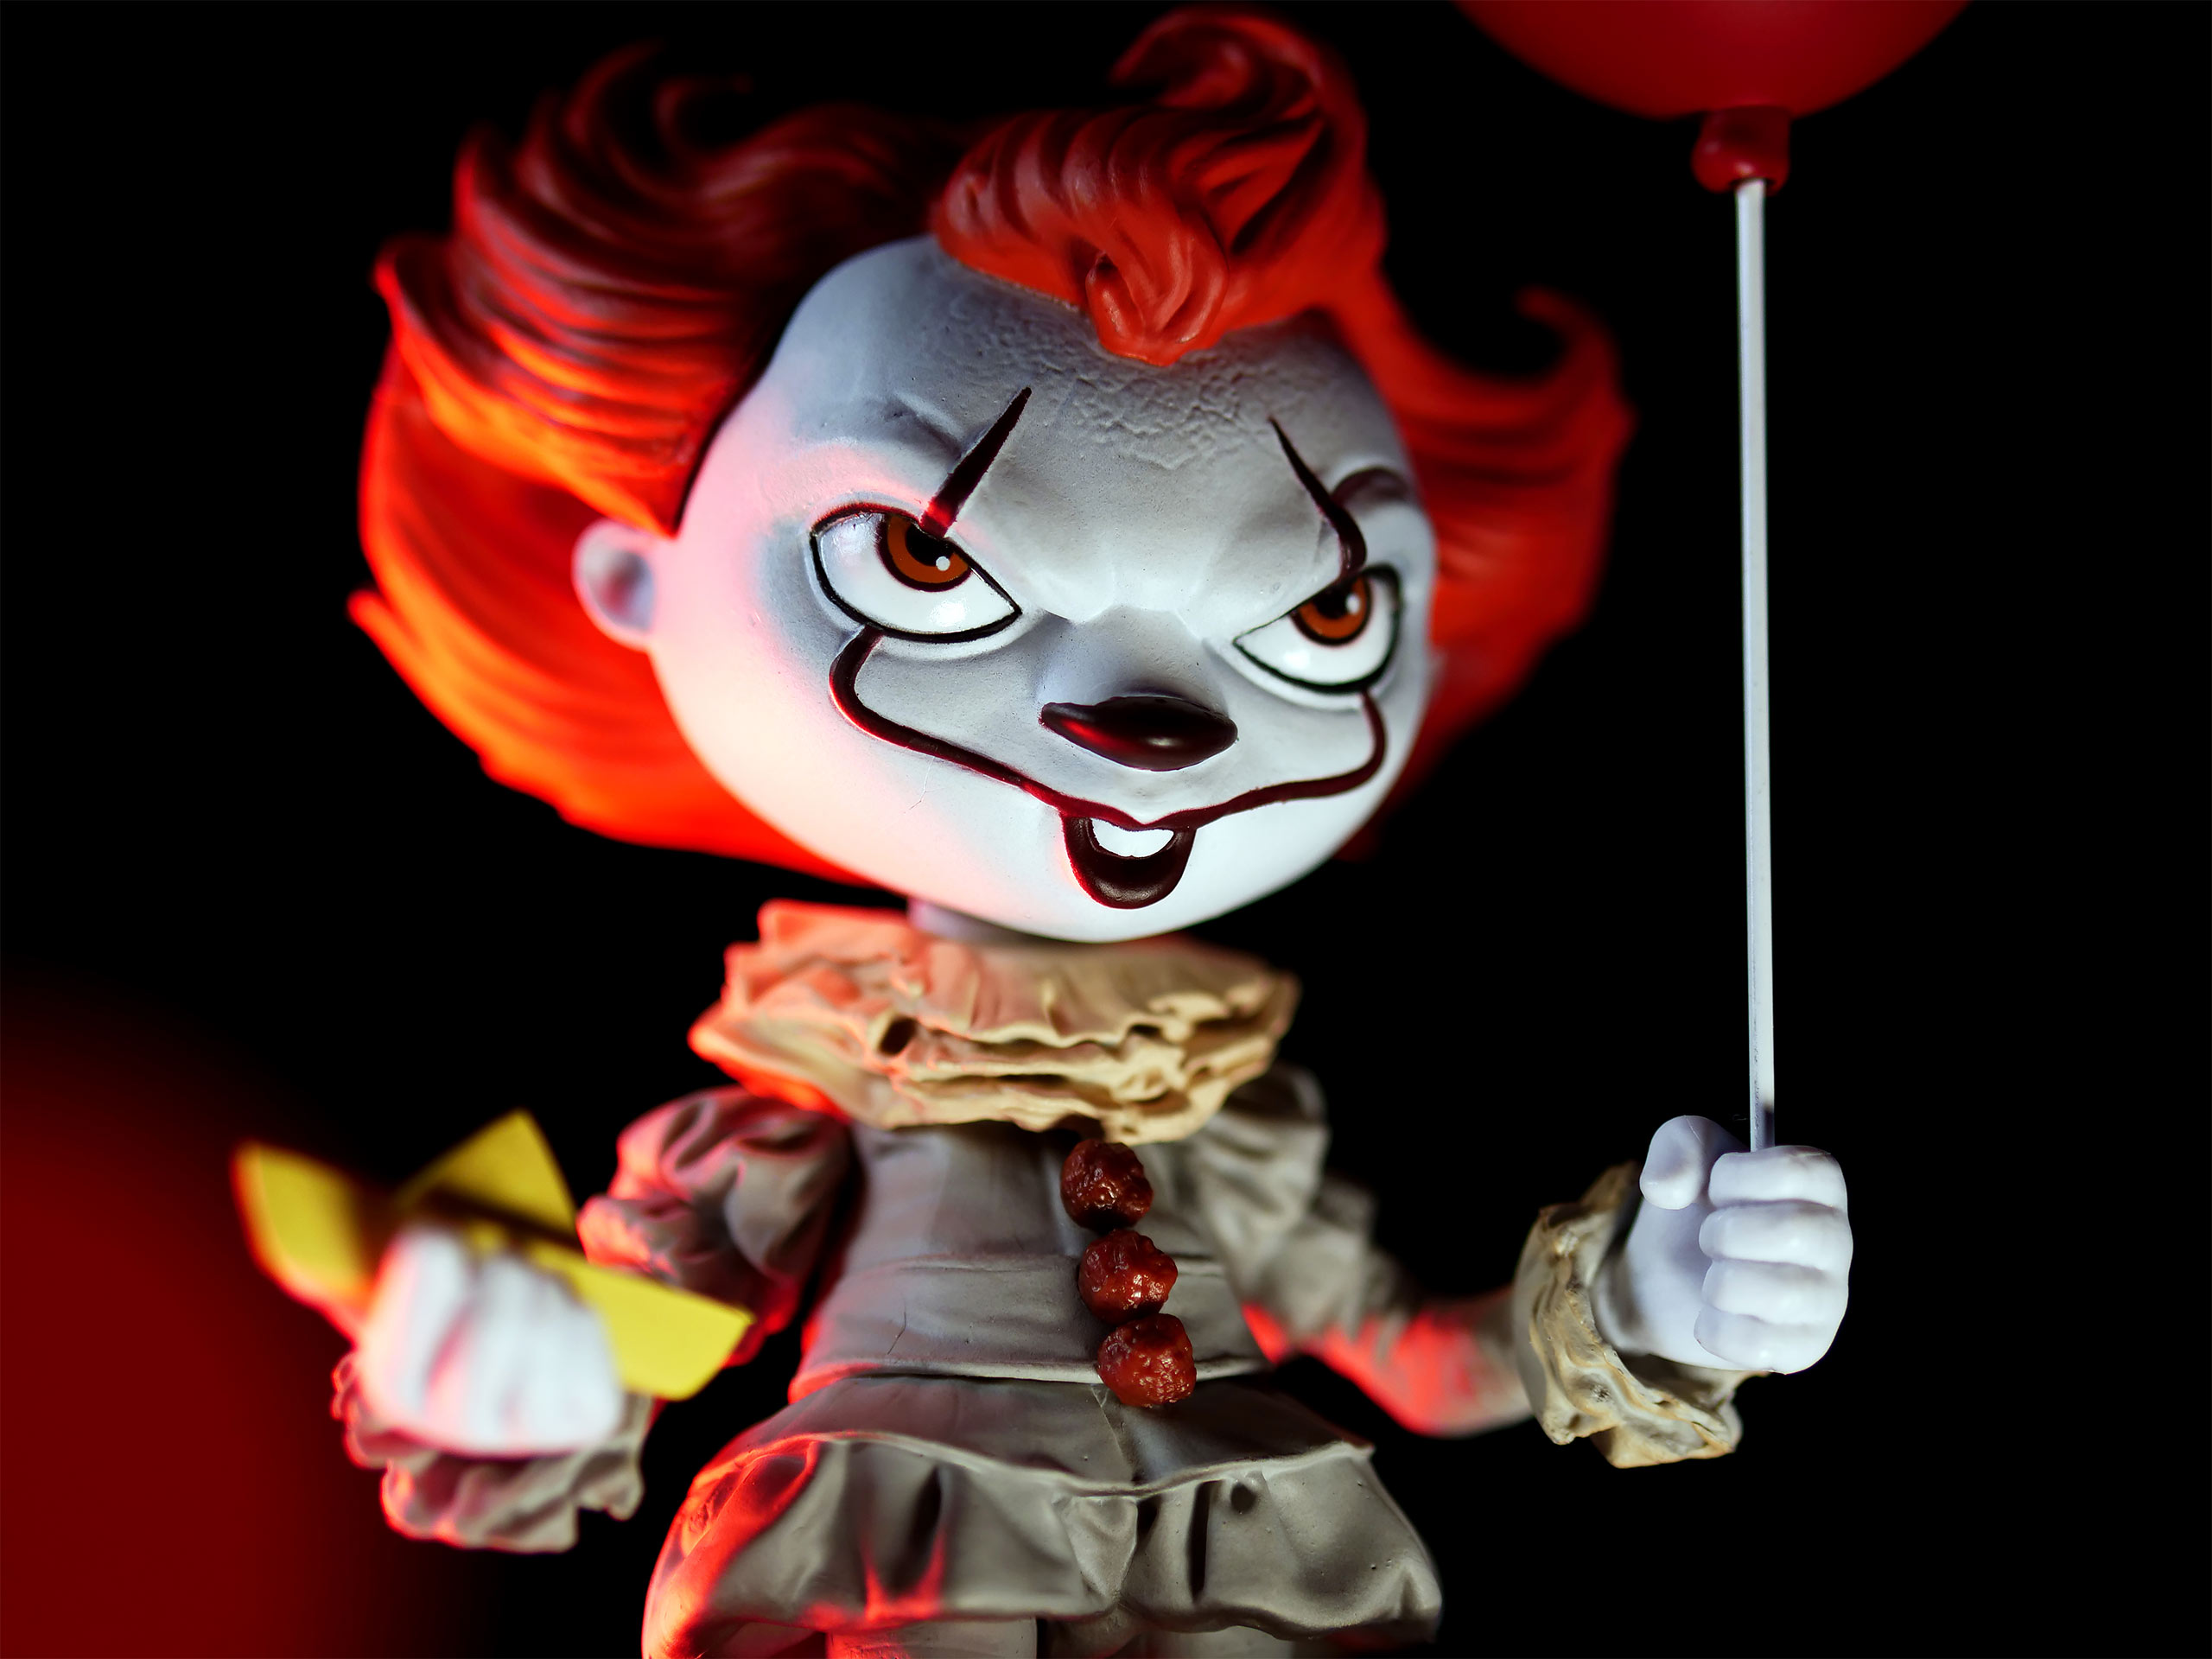 Stephen King's IT - Pennywise Minico Figuur